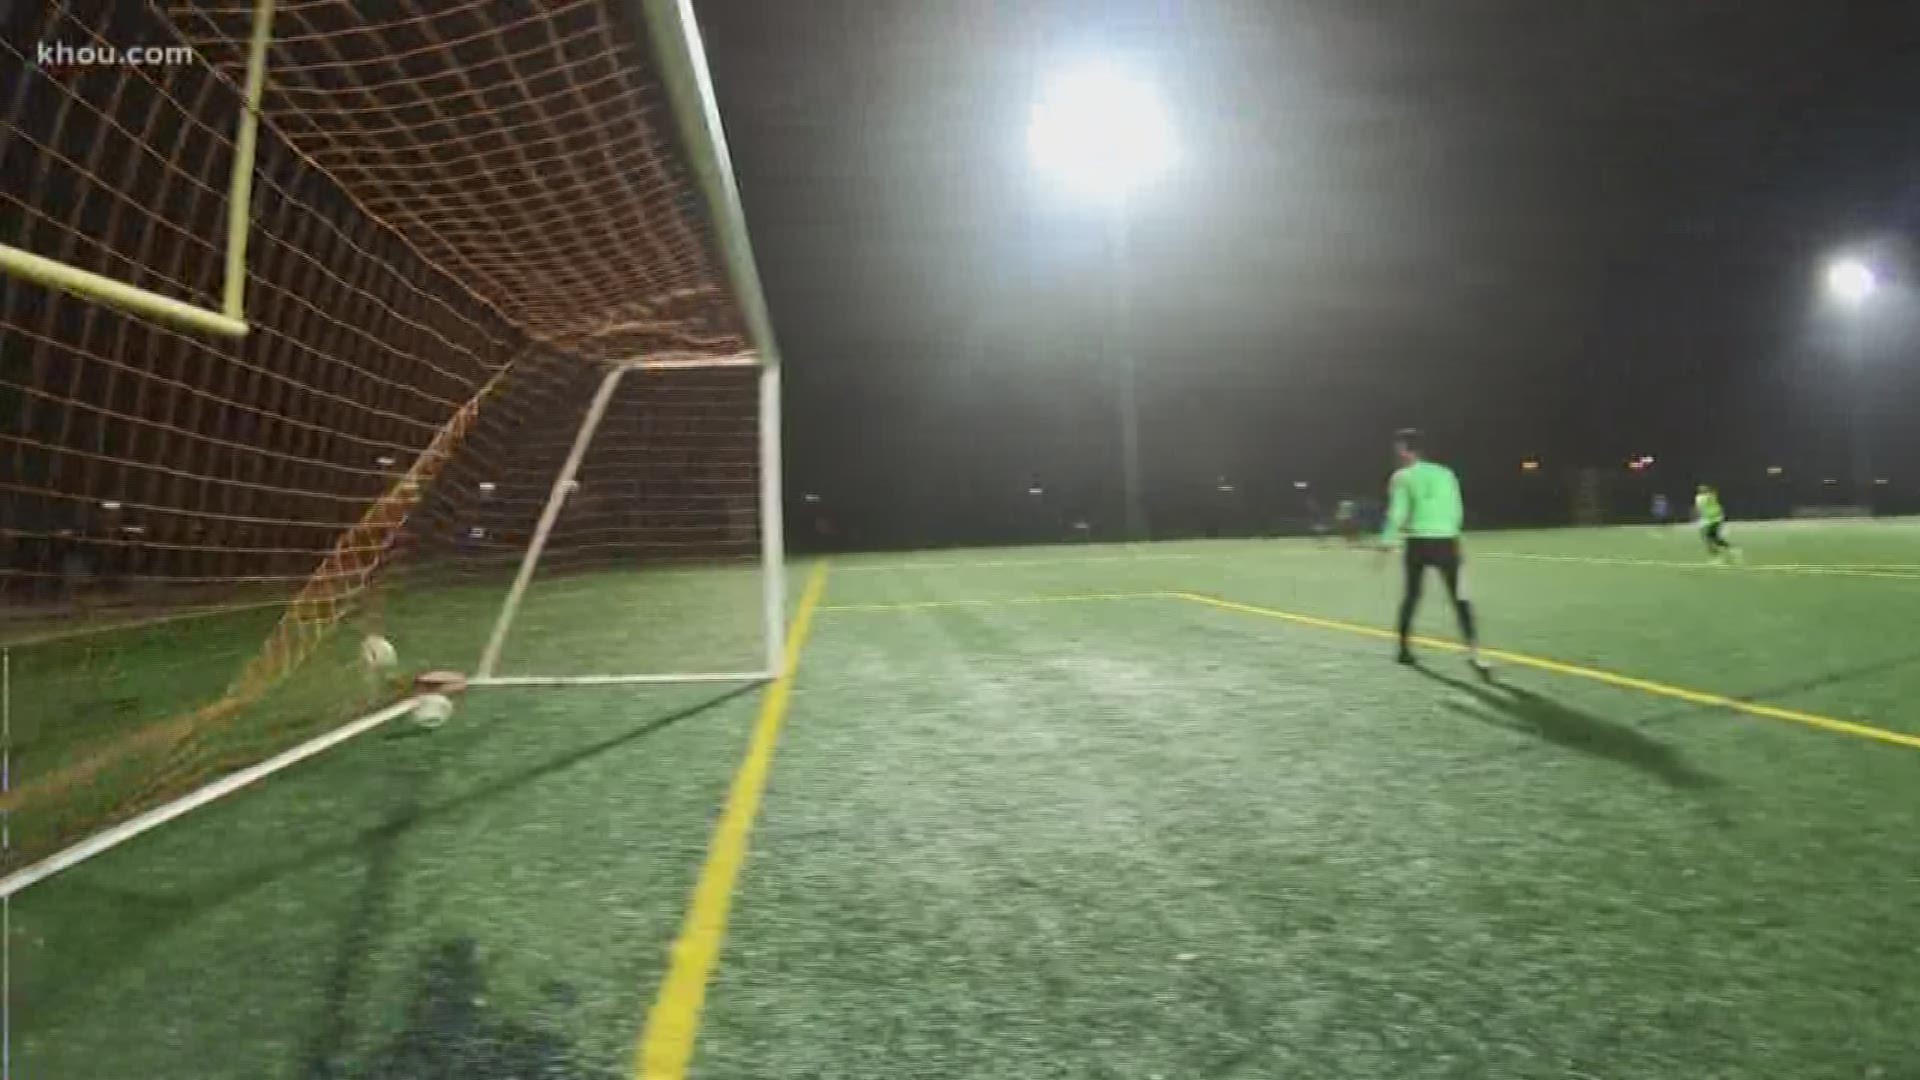 Young refugees want to fit in but often stand out because they are struggling to adjust. But dozens are getting a kick out of a Houston soccer program with unique goals.